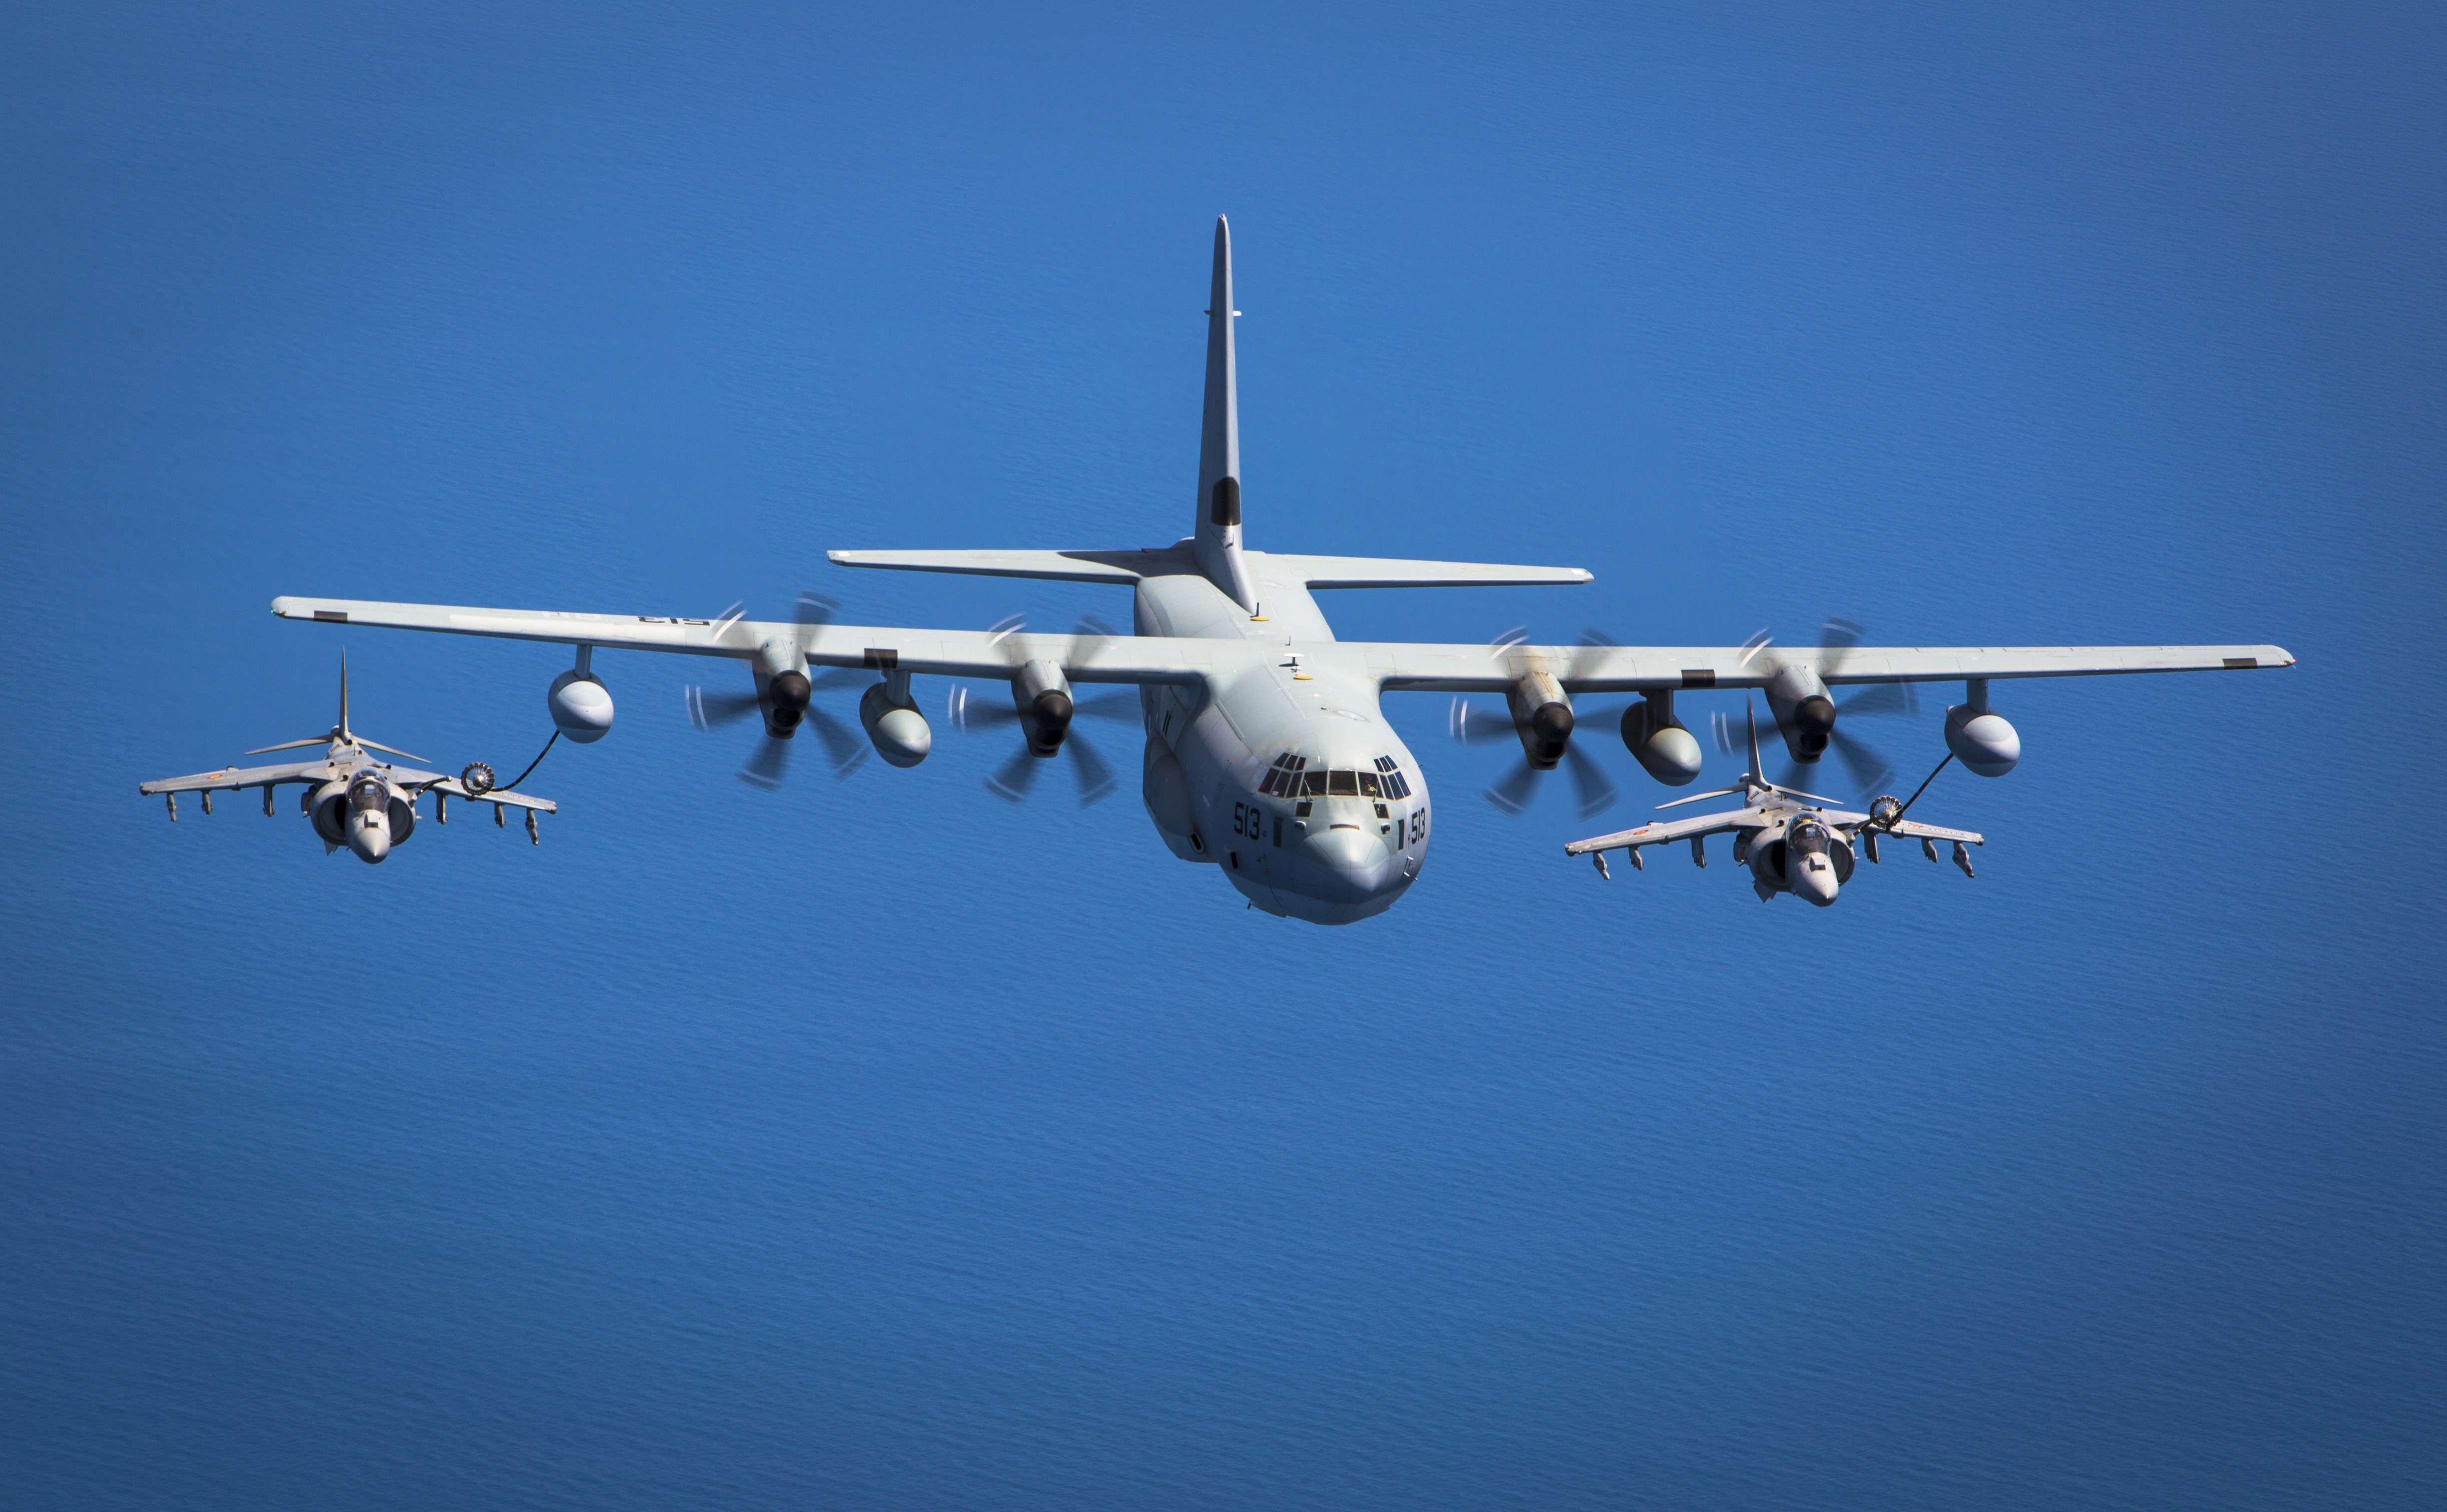 Two Spanish Navy Harriers fly behind a U.S. Marine KC-130J from Special-Purpose Marine Air-Ground Task Force Crisis Response-Africa during an aerial-refueling exercise off the coast of Spain May 15, 2015. US Marine Corps photo.